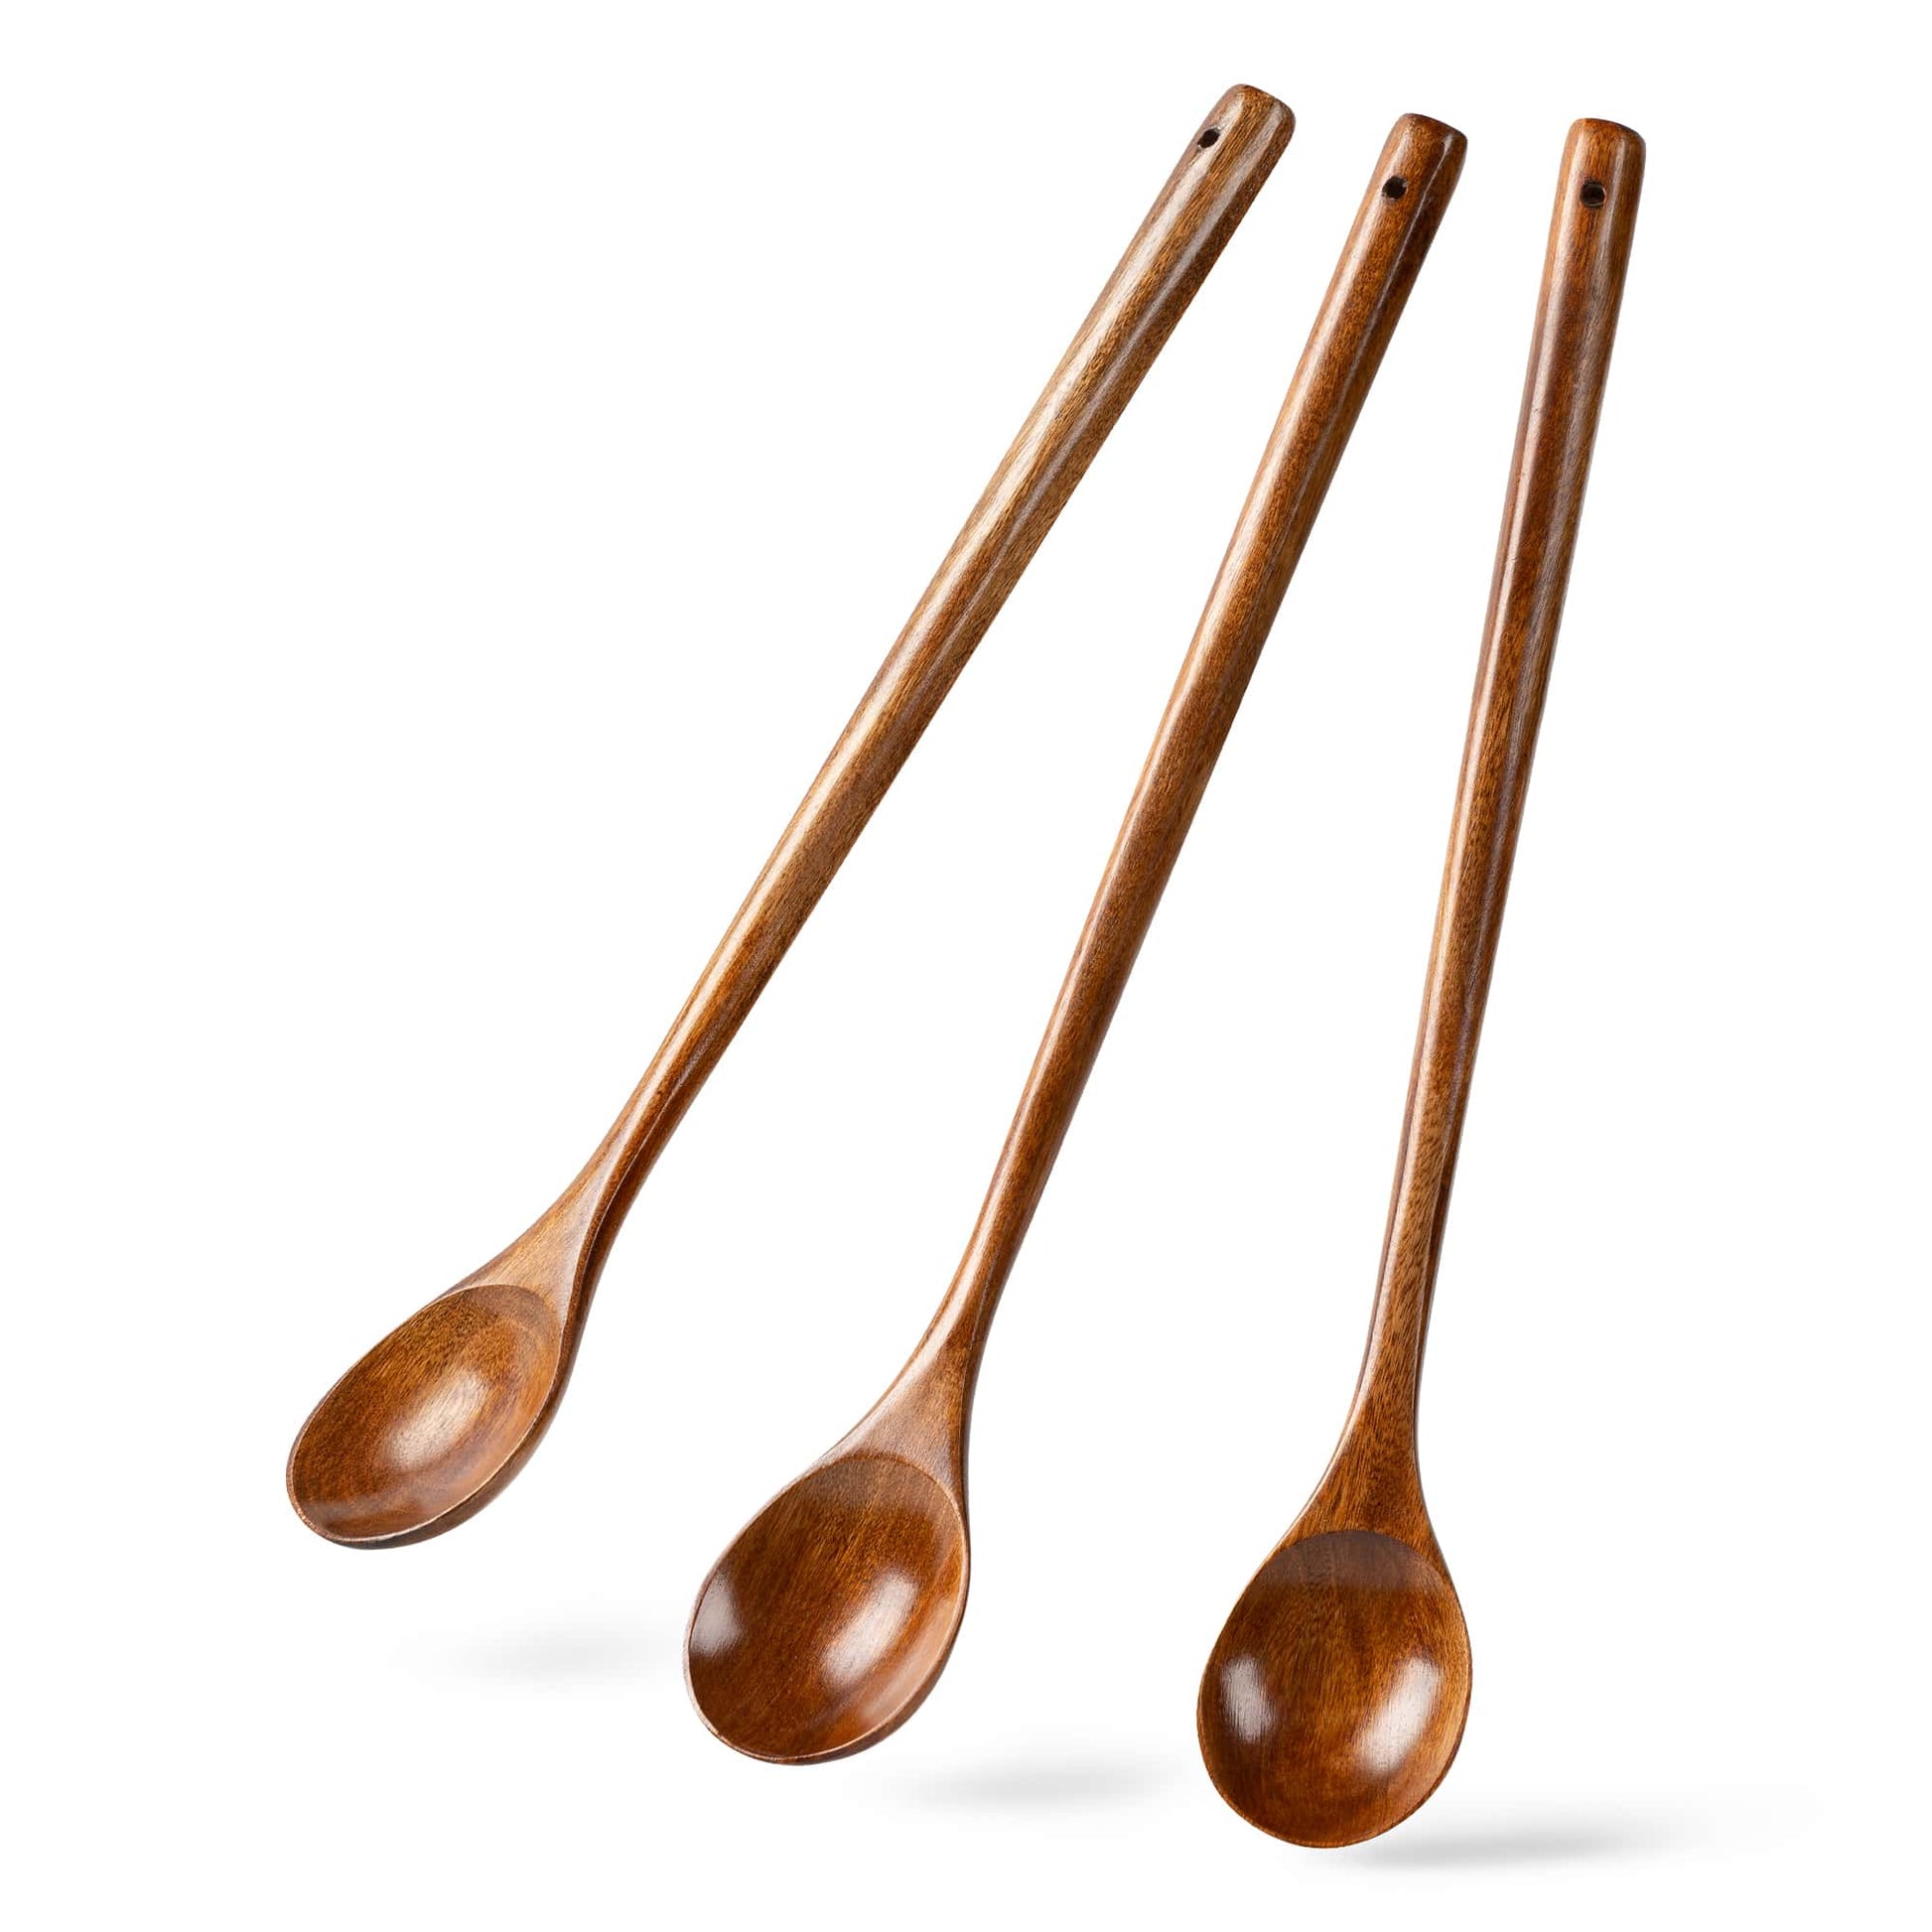 These are three 13 inch handmade natural wood long handled stirring spoons, large wooden spoons for cooking